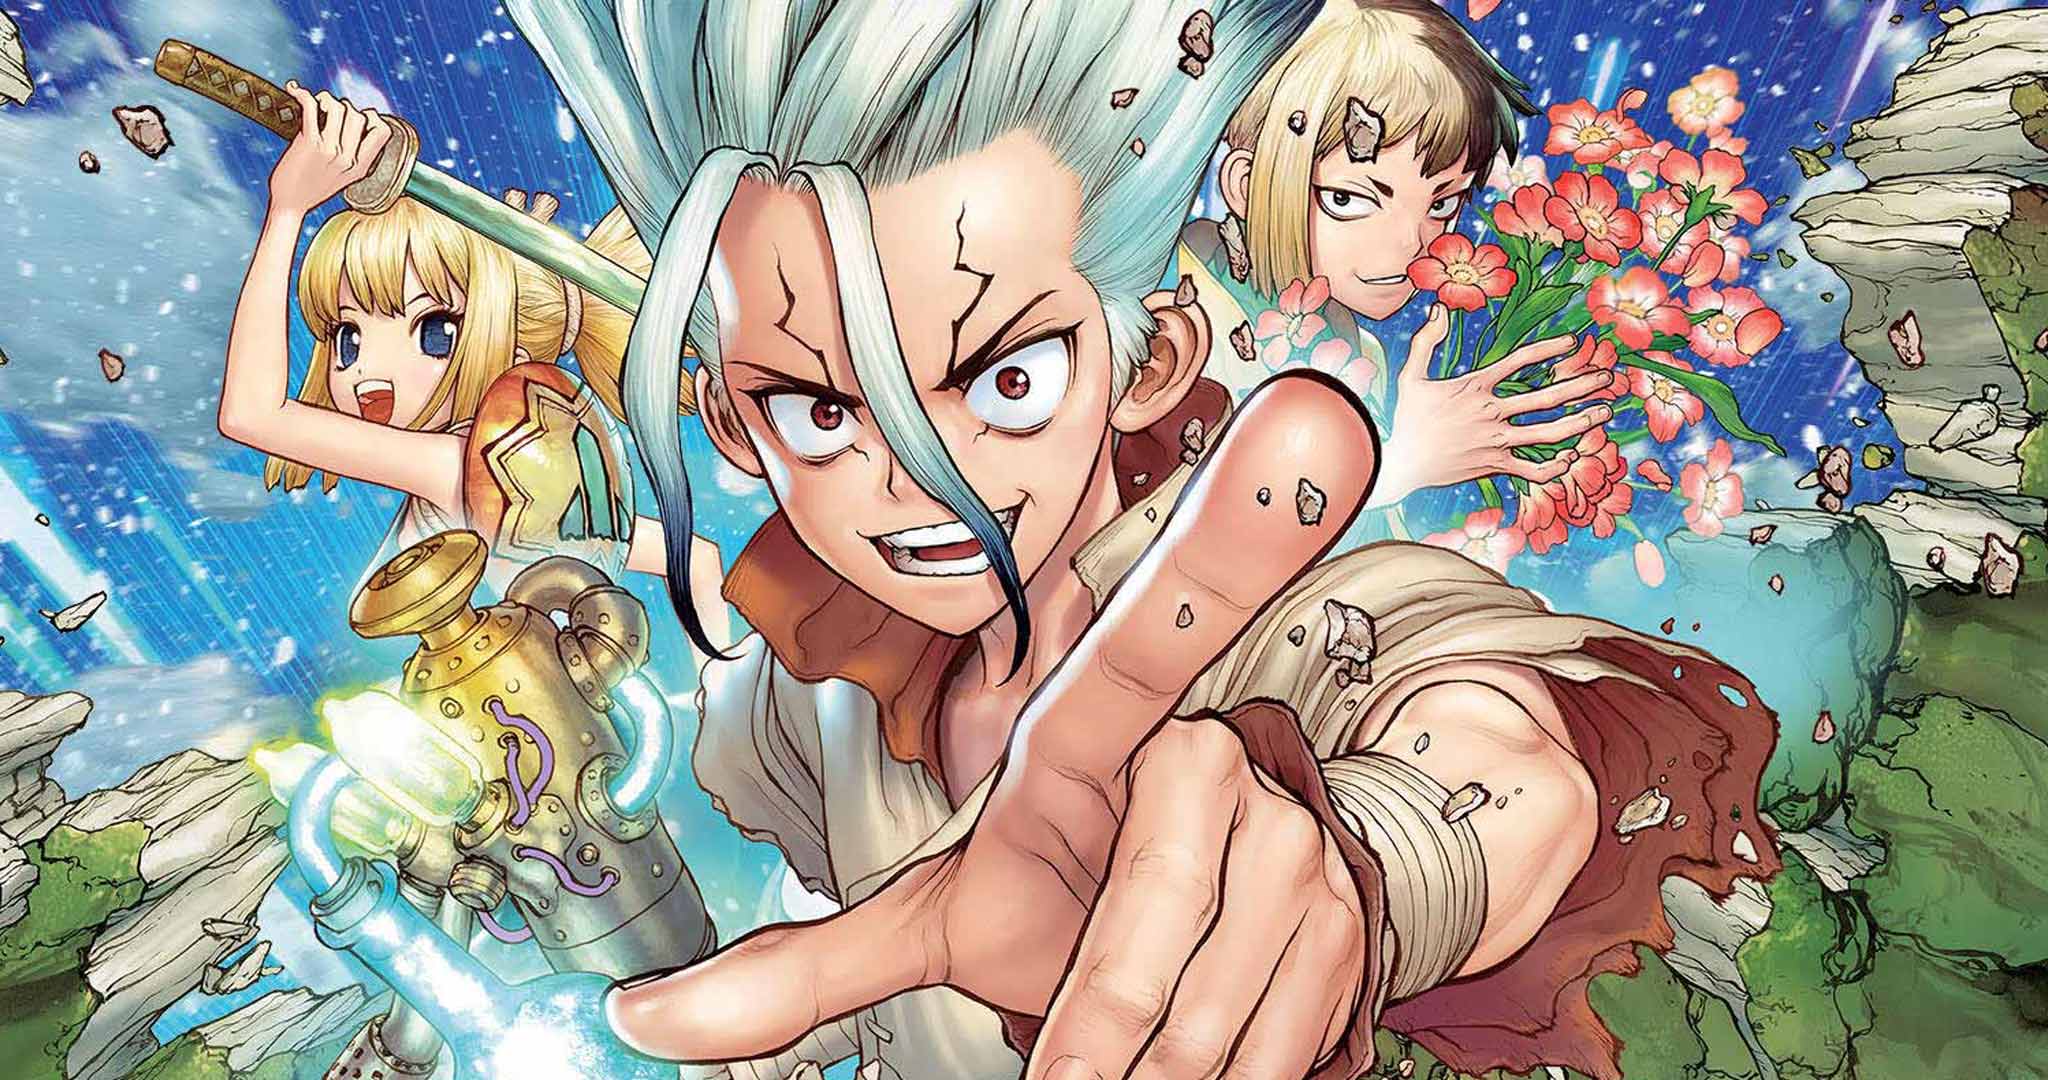 Dr Stone’ Episode Release Date and Spoilers What We